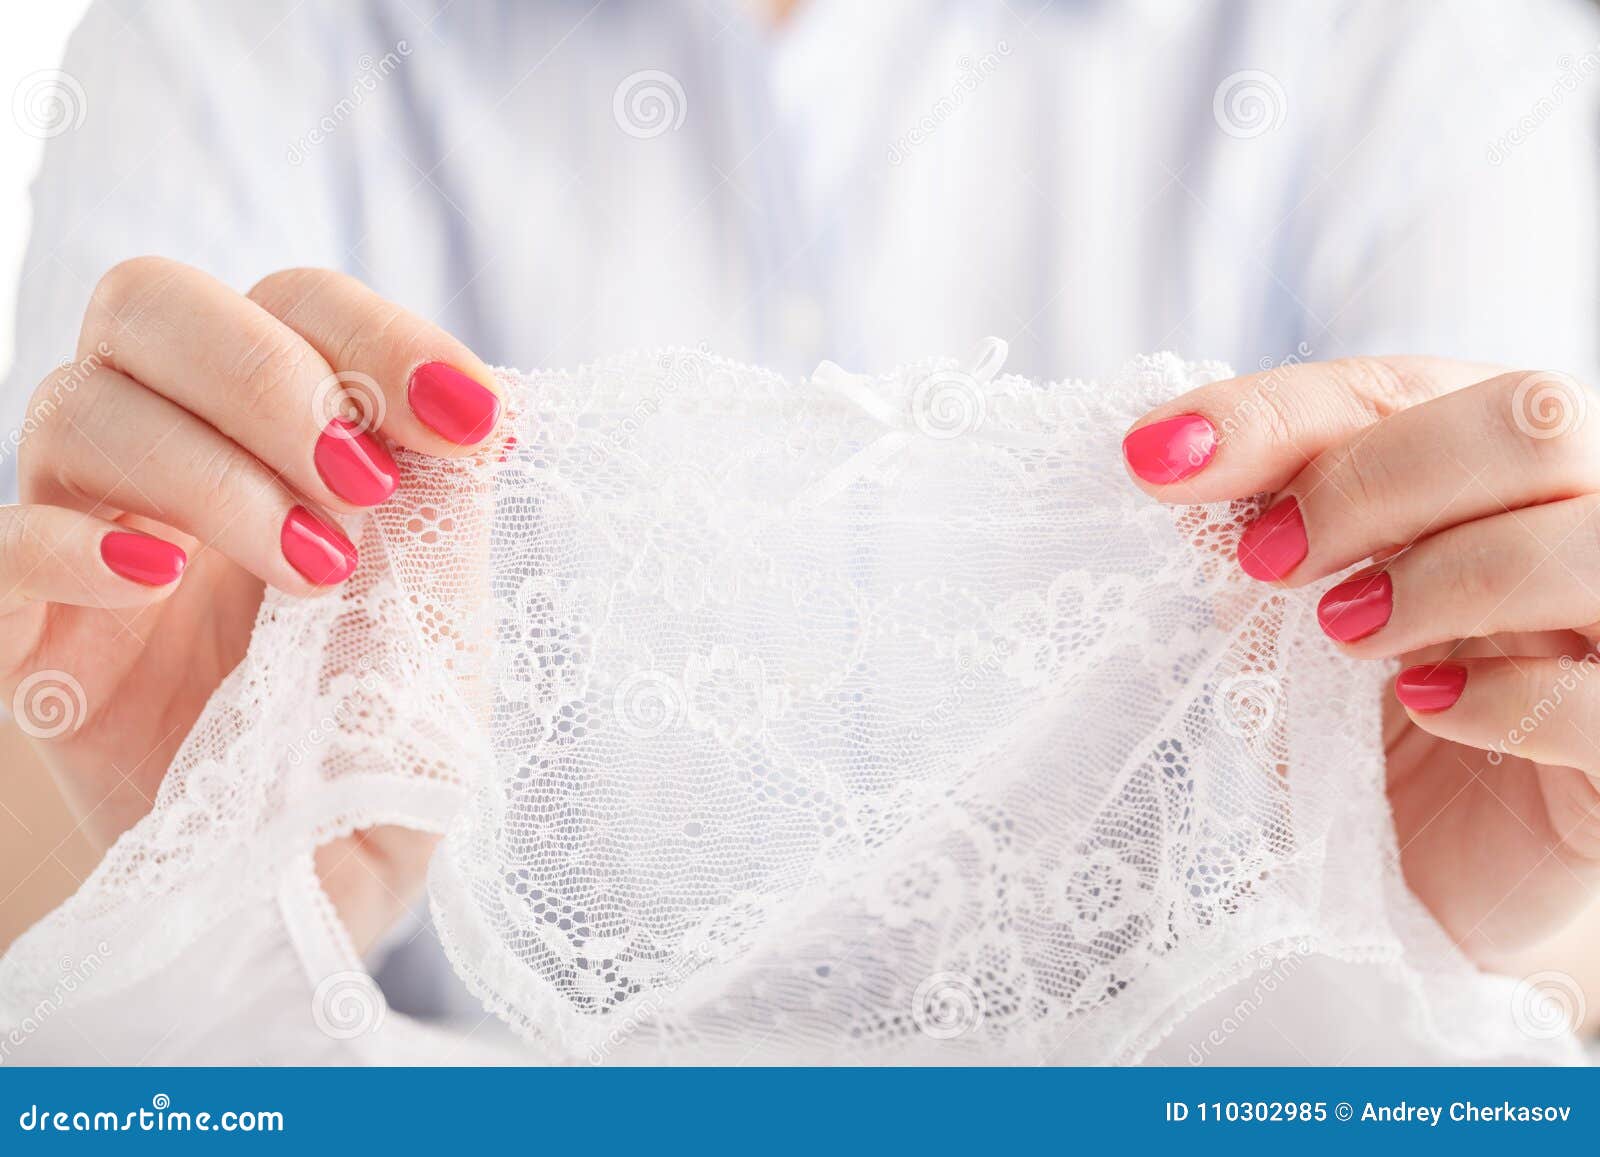 Female Hands Holding Black and White Lacy Panties, White